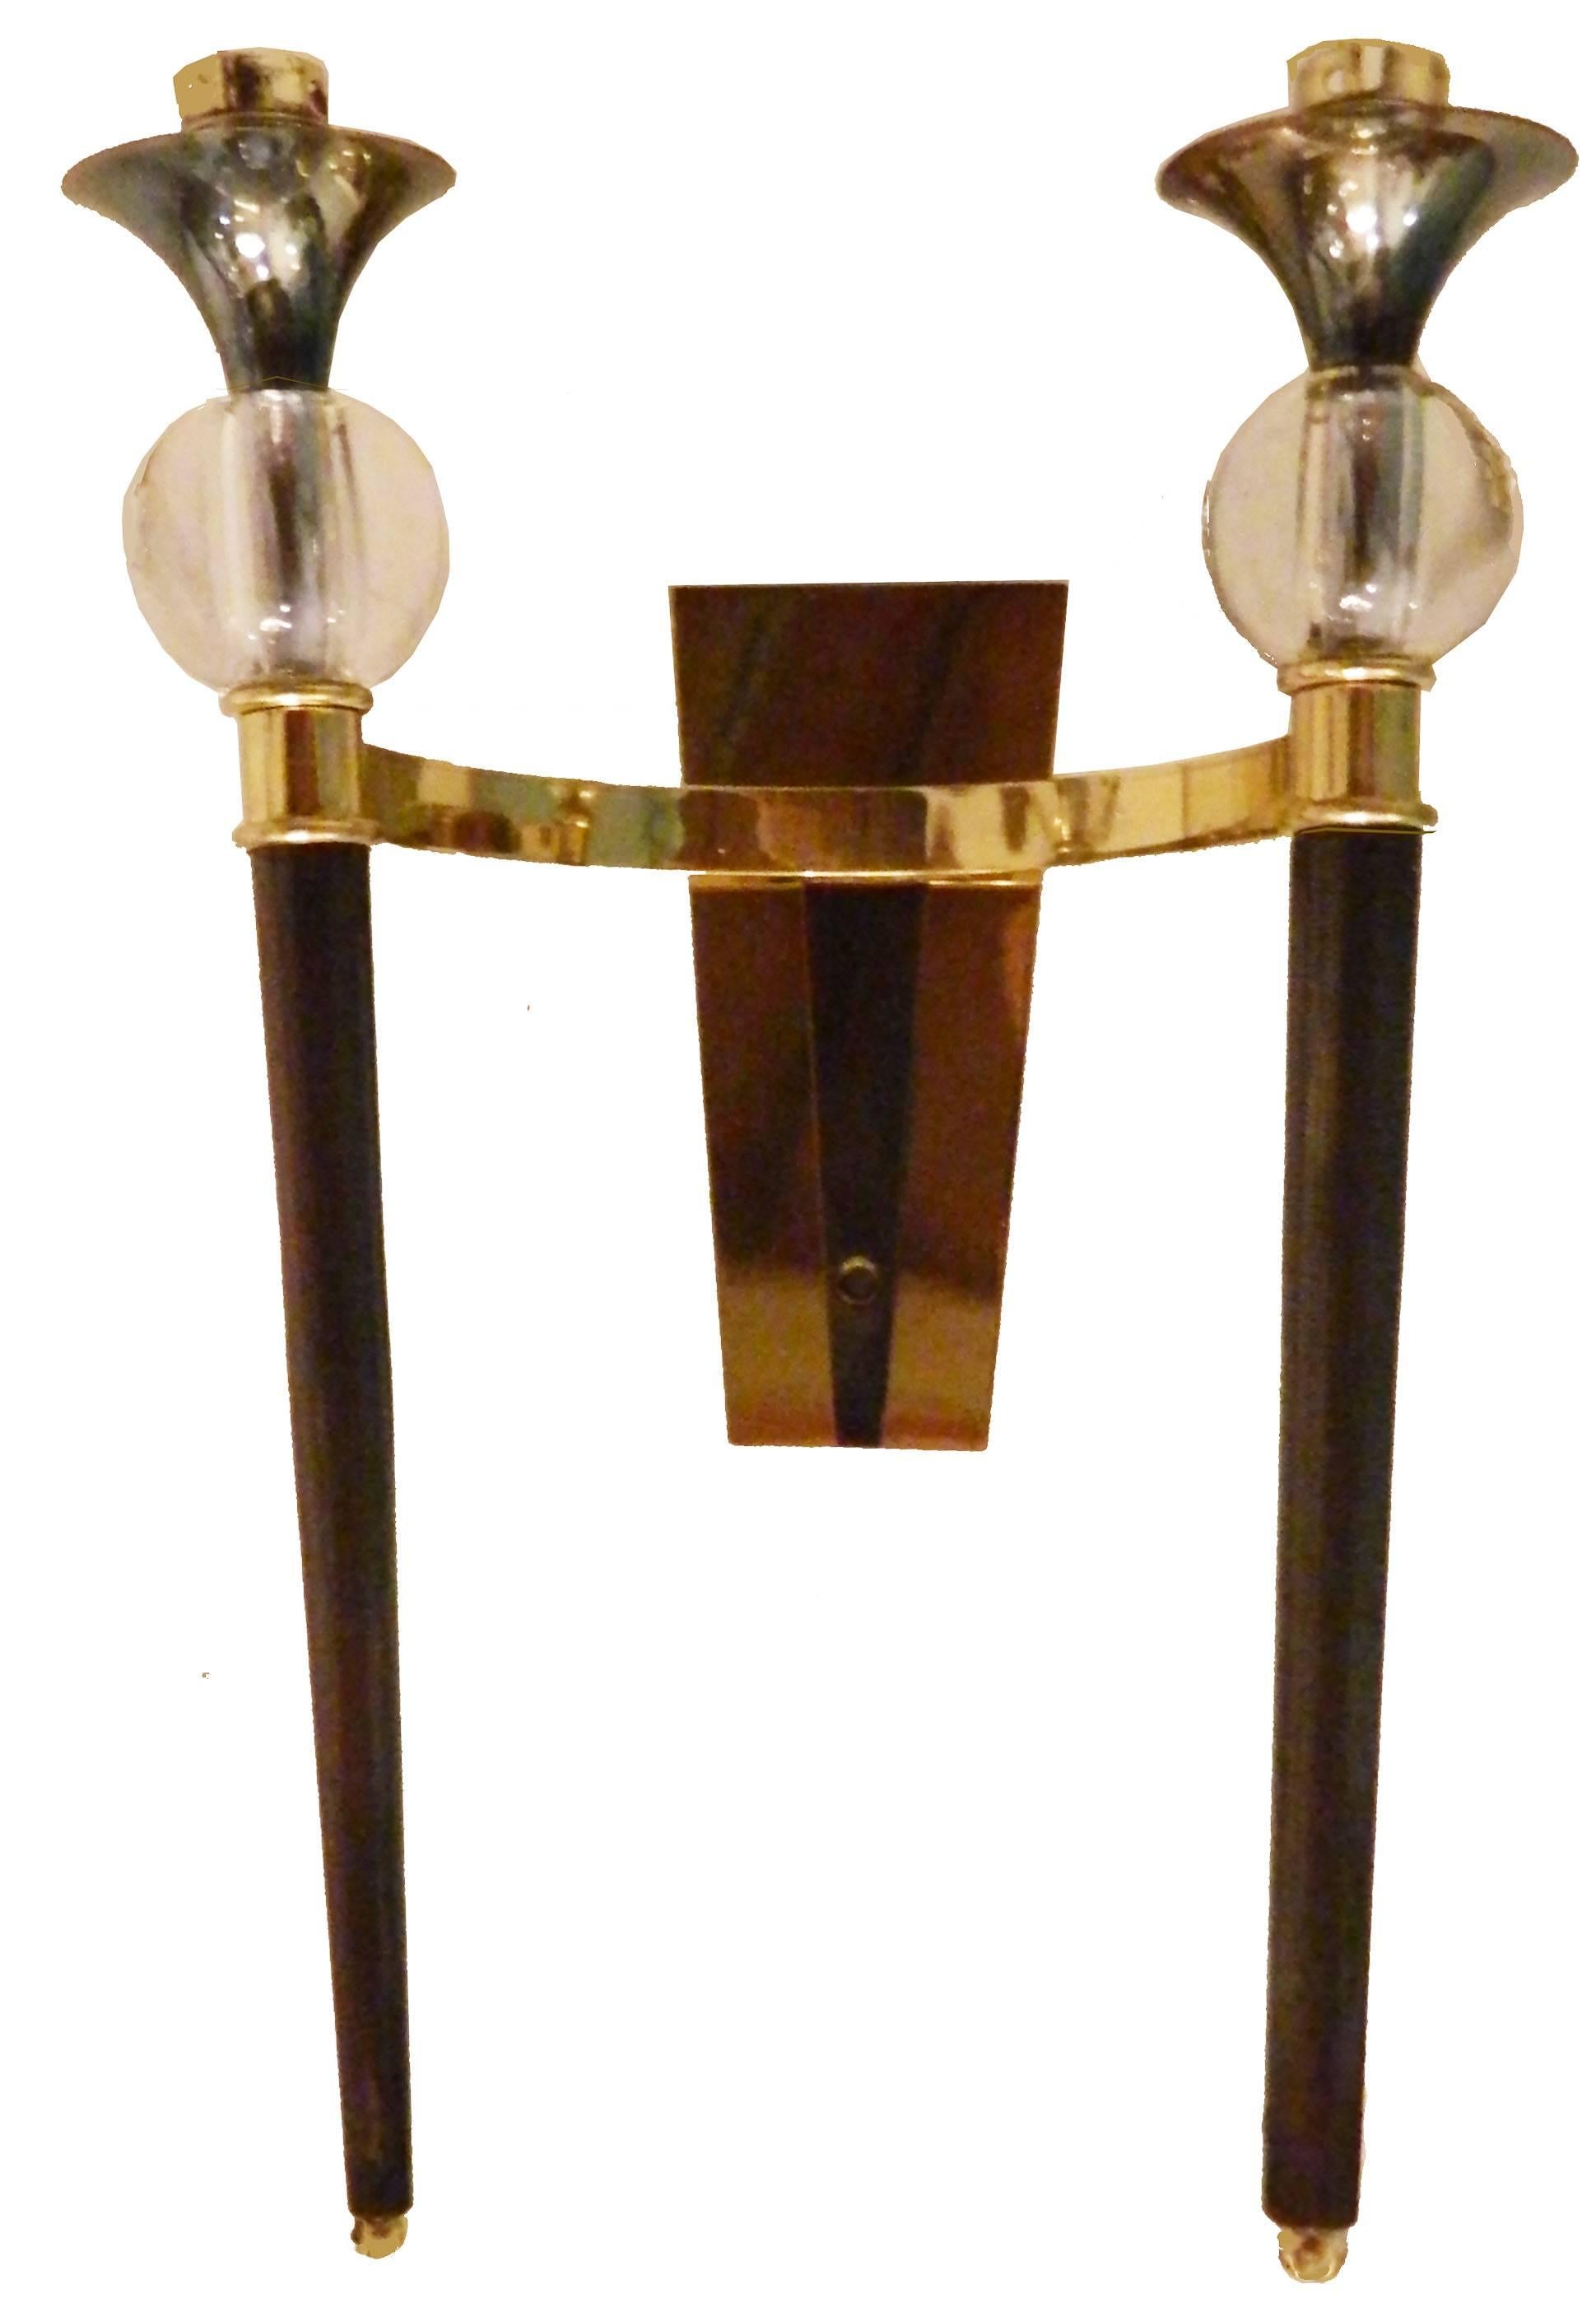 Impressive pair of Maison Jansen sconces, two-tone brass and gun metal, glass
ball and brass.
Size without shades : 14.5